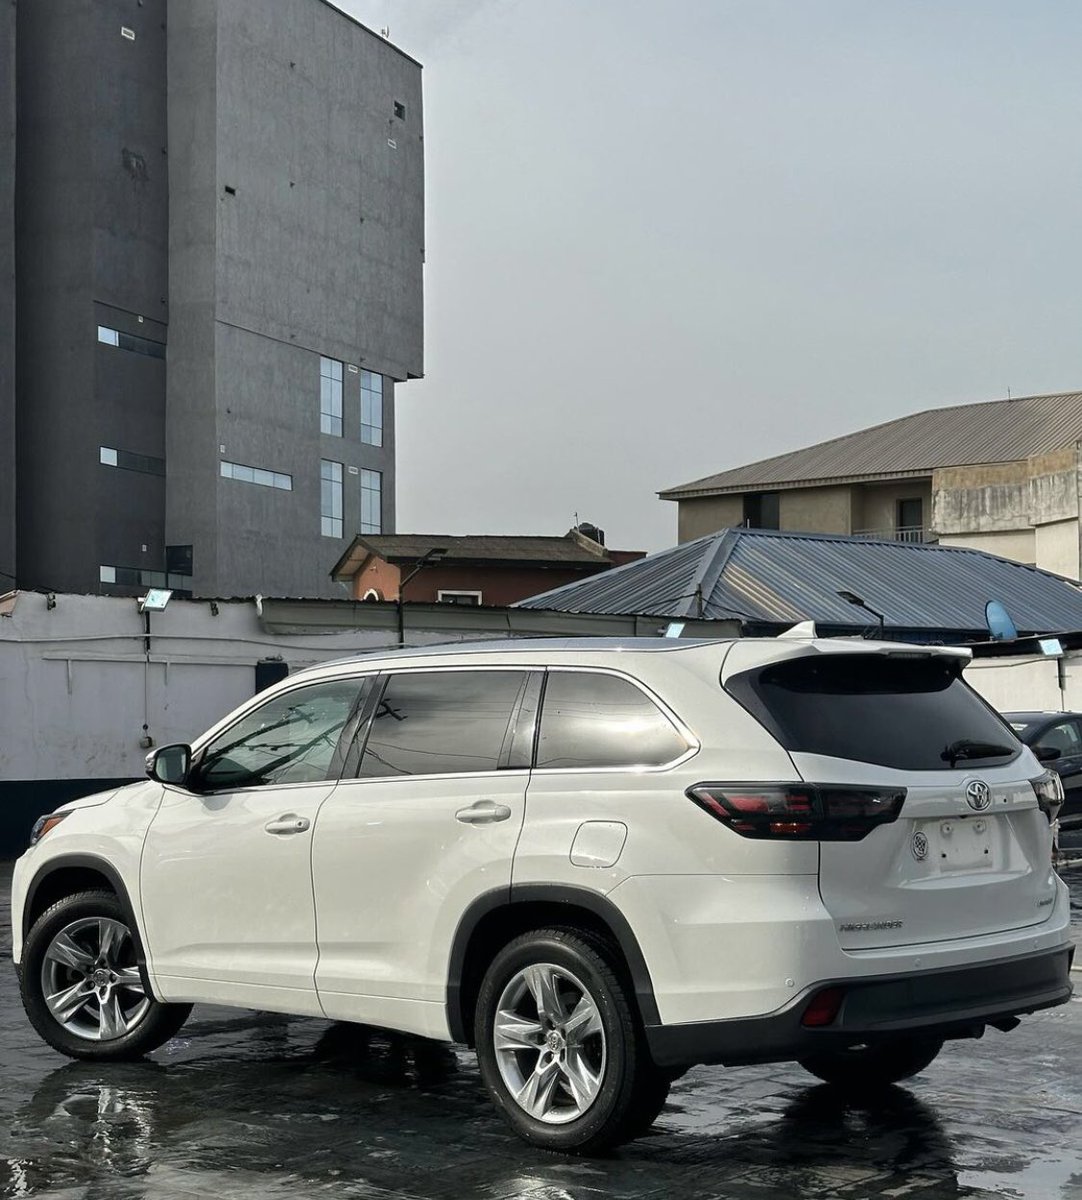 For Sale: Tokunbo 2015 Toyota Highlander (Platinum Edition)

📍: Agege

Asking Price: 40.5m (Slightly Negotiable)

If interested, DM or Call/Whatsapp; 08188111105 for Inspection.

#BuyLagosLtd #BuyLagosLtdAutomobile #CarsForSale #ToyotaHighlanderPlatinumEdition